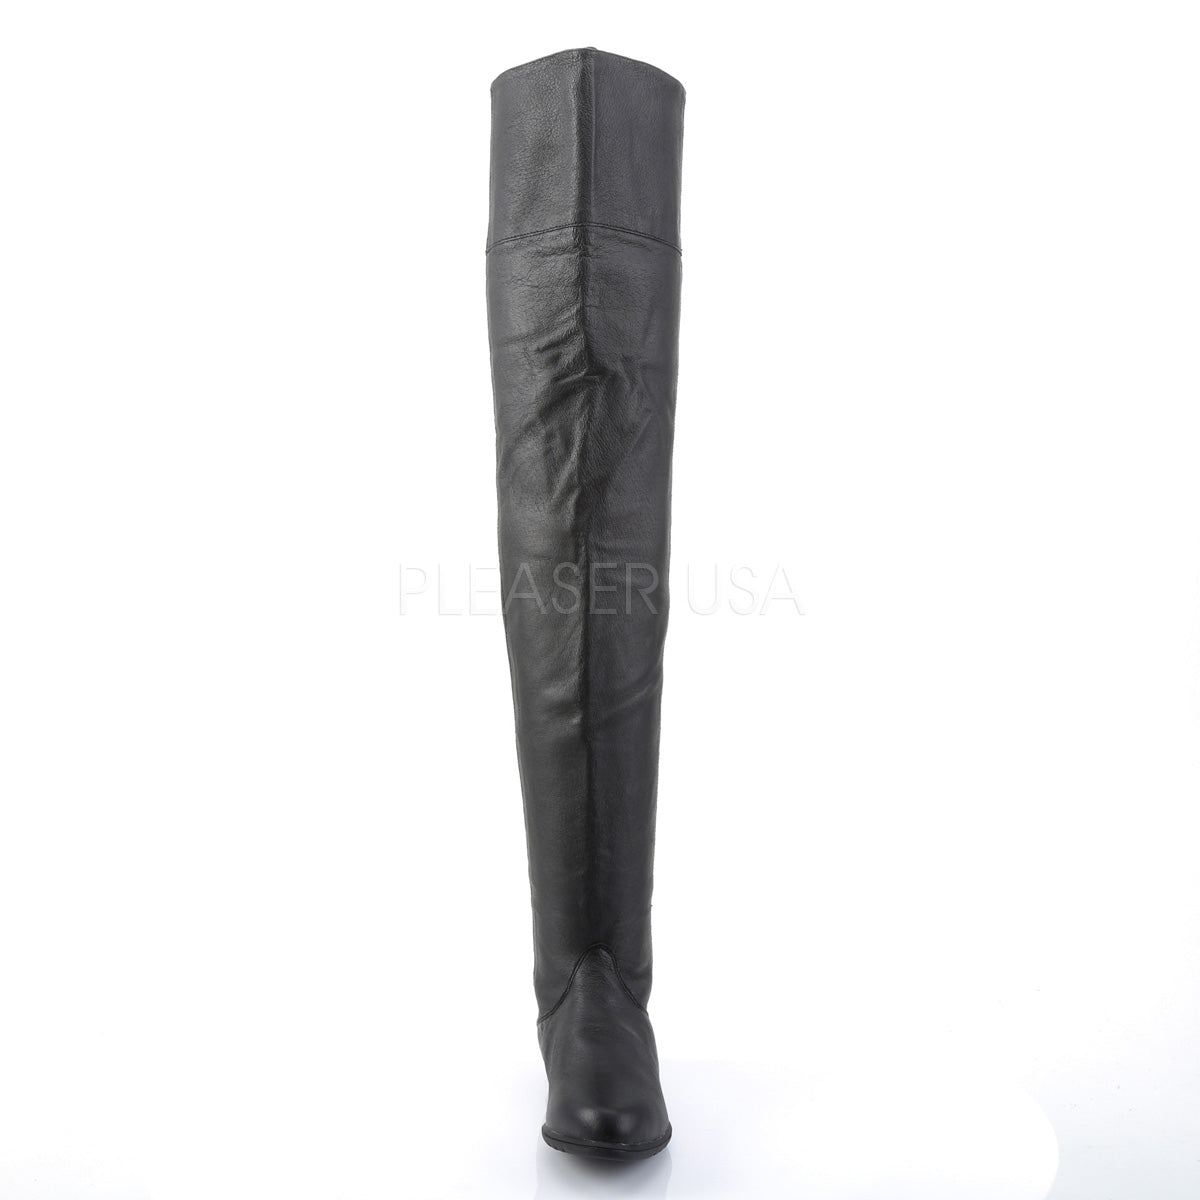 4 inch thigh high boots